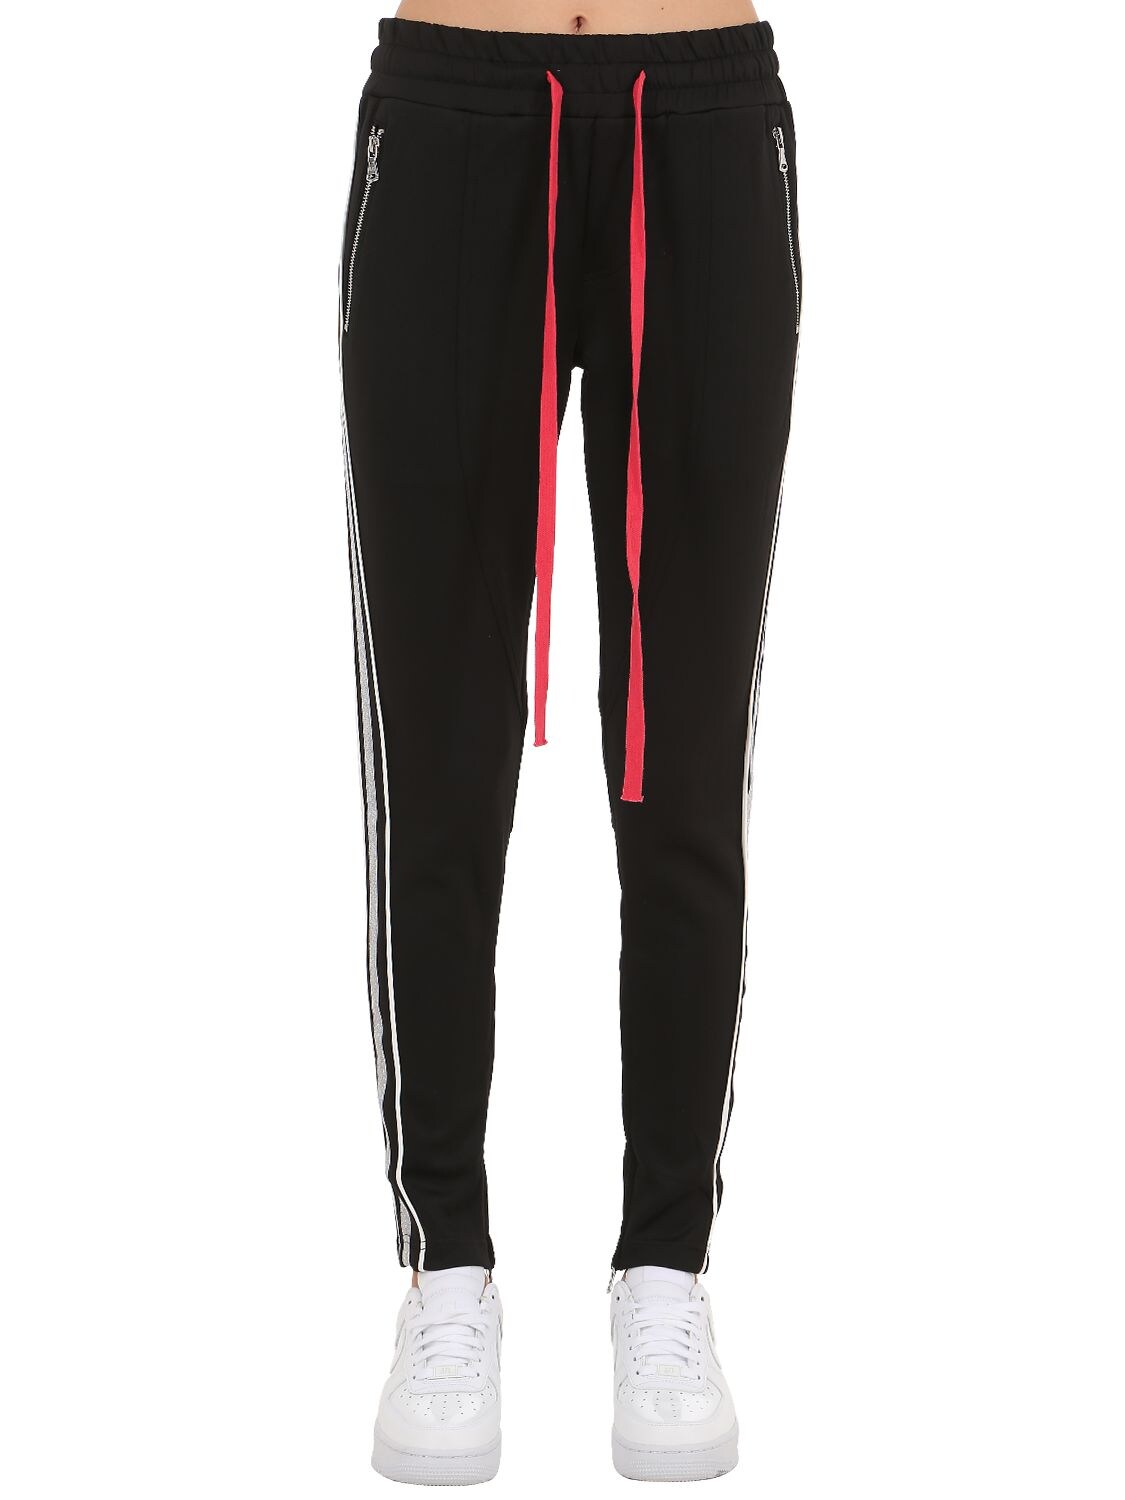 Lifted Anchors Jenner Track Pants W/ Side Bands In Black